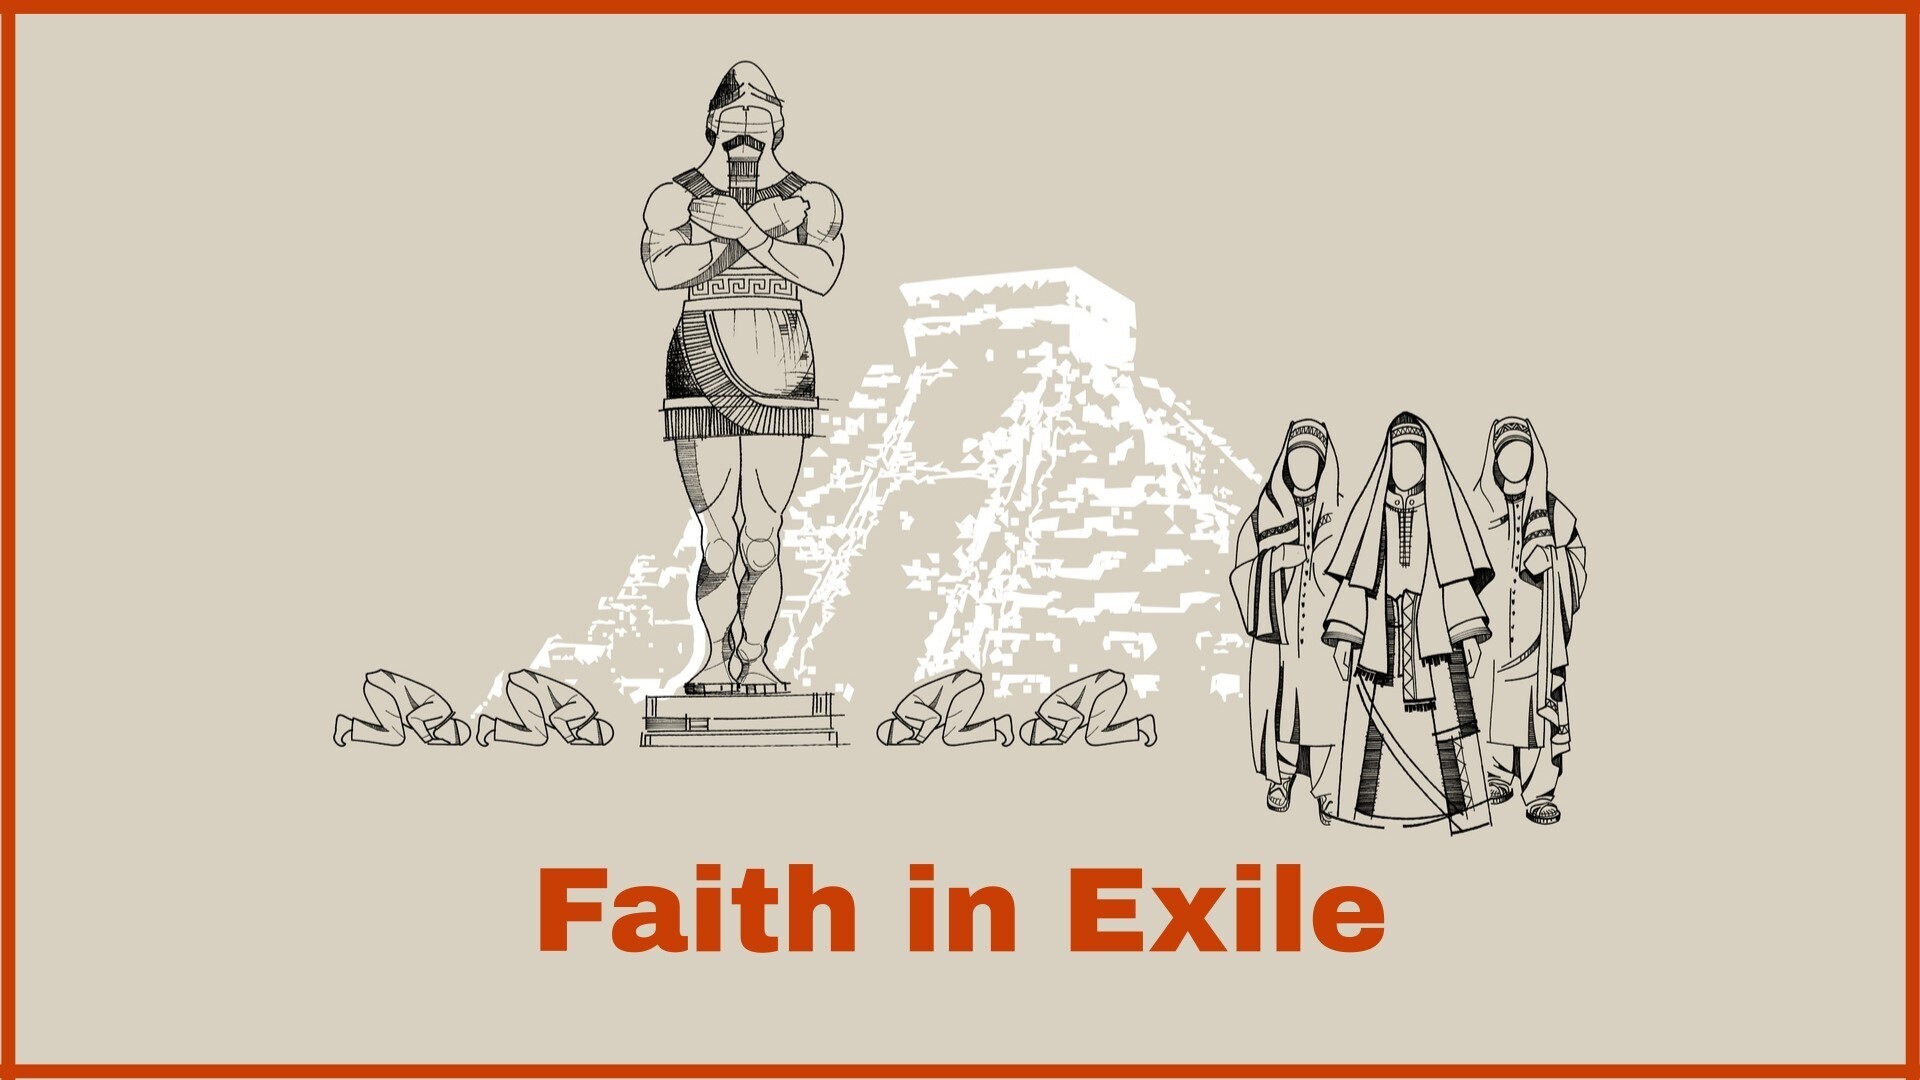 Image of statue and pyramid with 'Faith in Exile' written over it